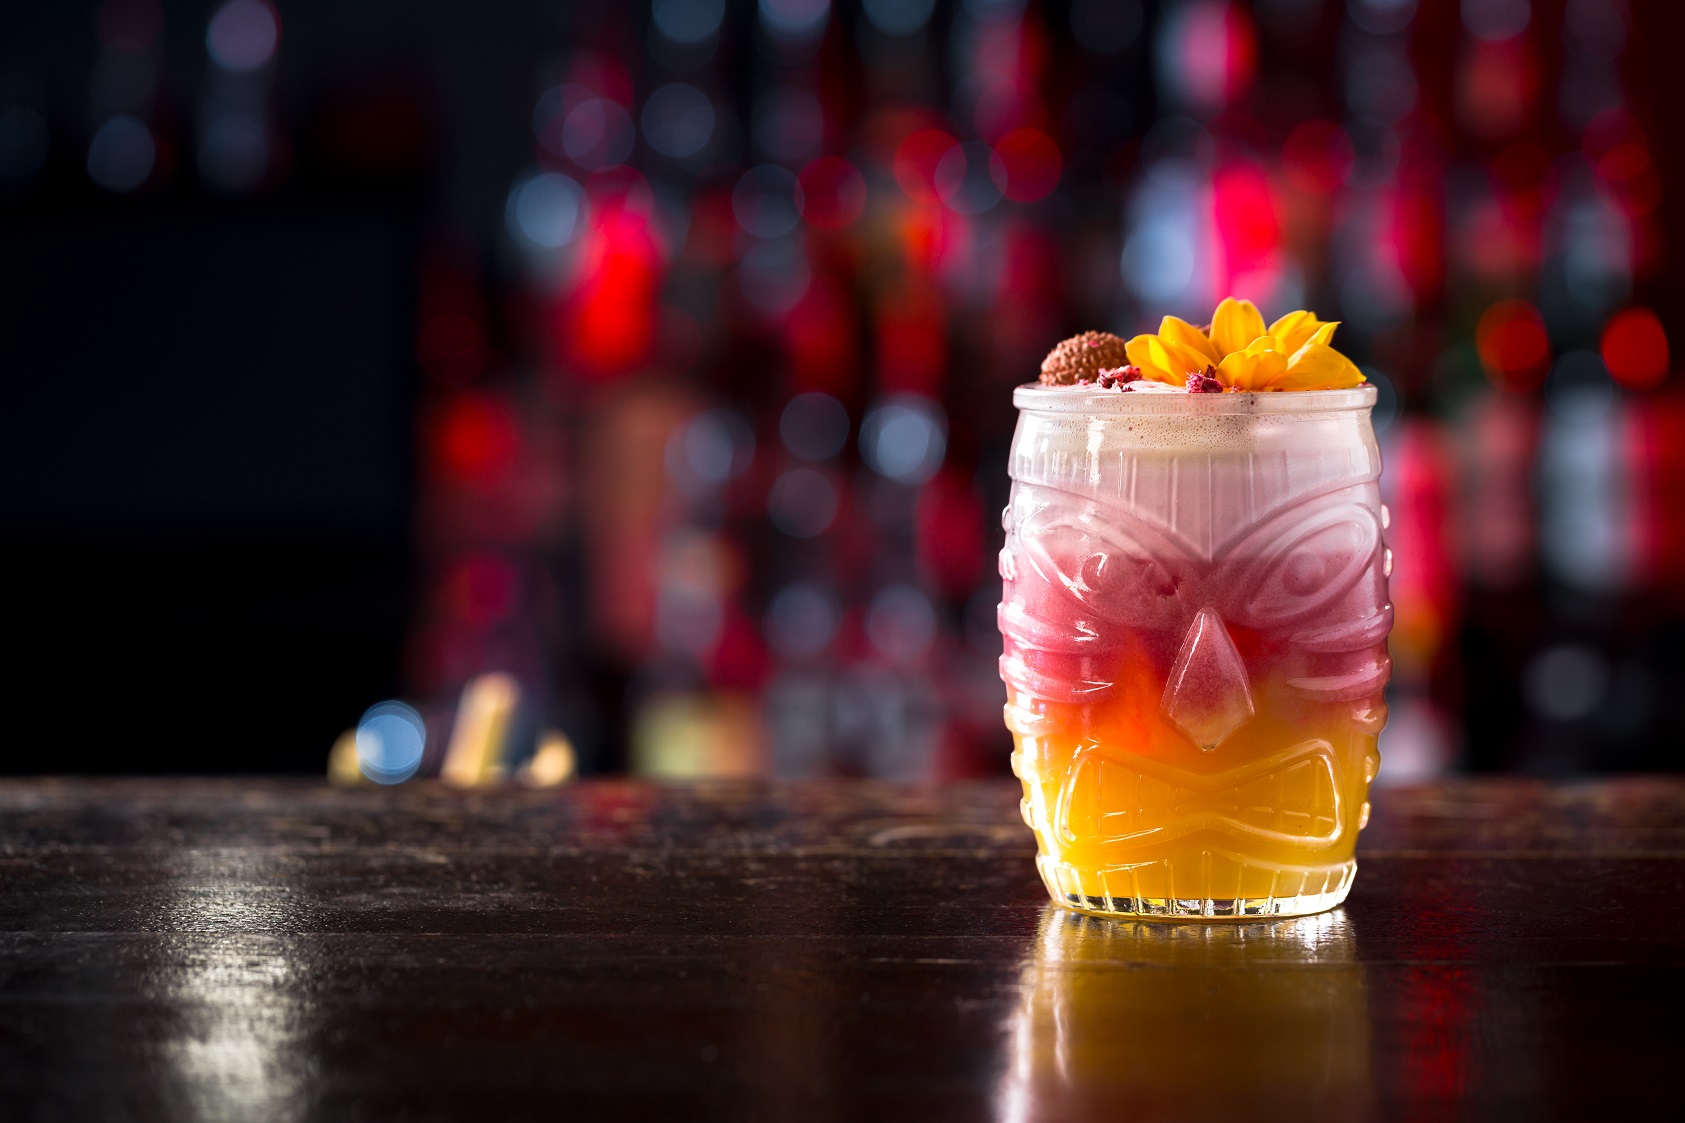 <p>Sometimes, the adults at Disney want a little secret something too. In that case, you should whisper an order for "Cerulean Blue Sangria," made from a Riesling and hints of orange. It comes garnished with a beautiful flower on top.</p>